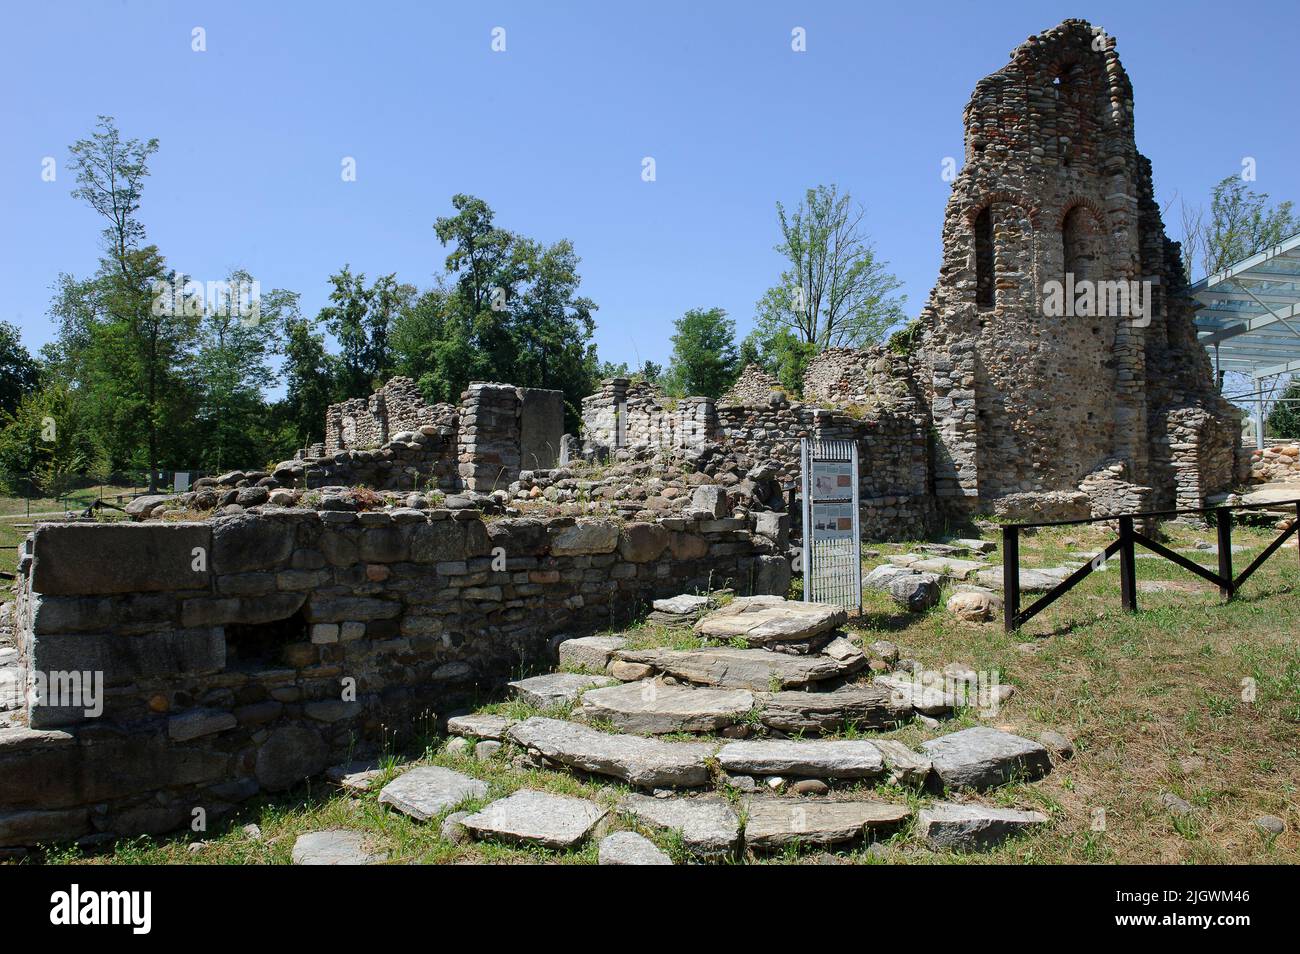 Europe, Italy, Lombardy, Varese countryThe archaeological area of Castelseprio with the ruins of a village destroyed in the 13th century. Unesco - Wor Stock Photo